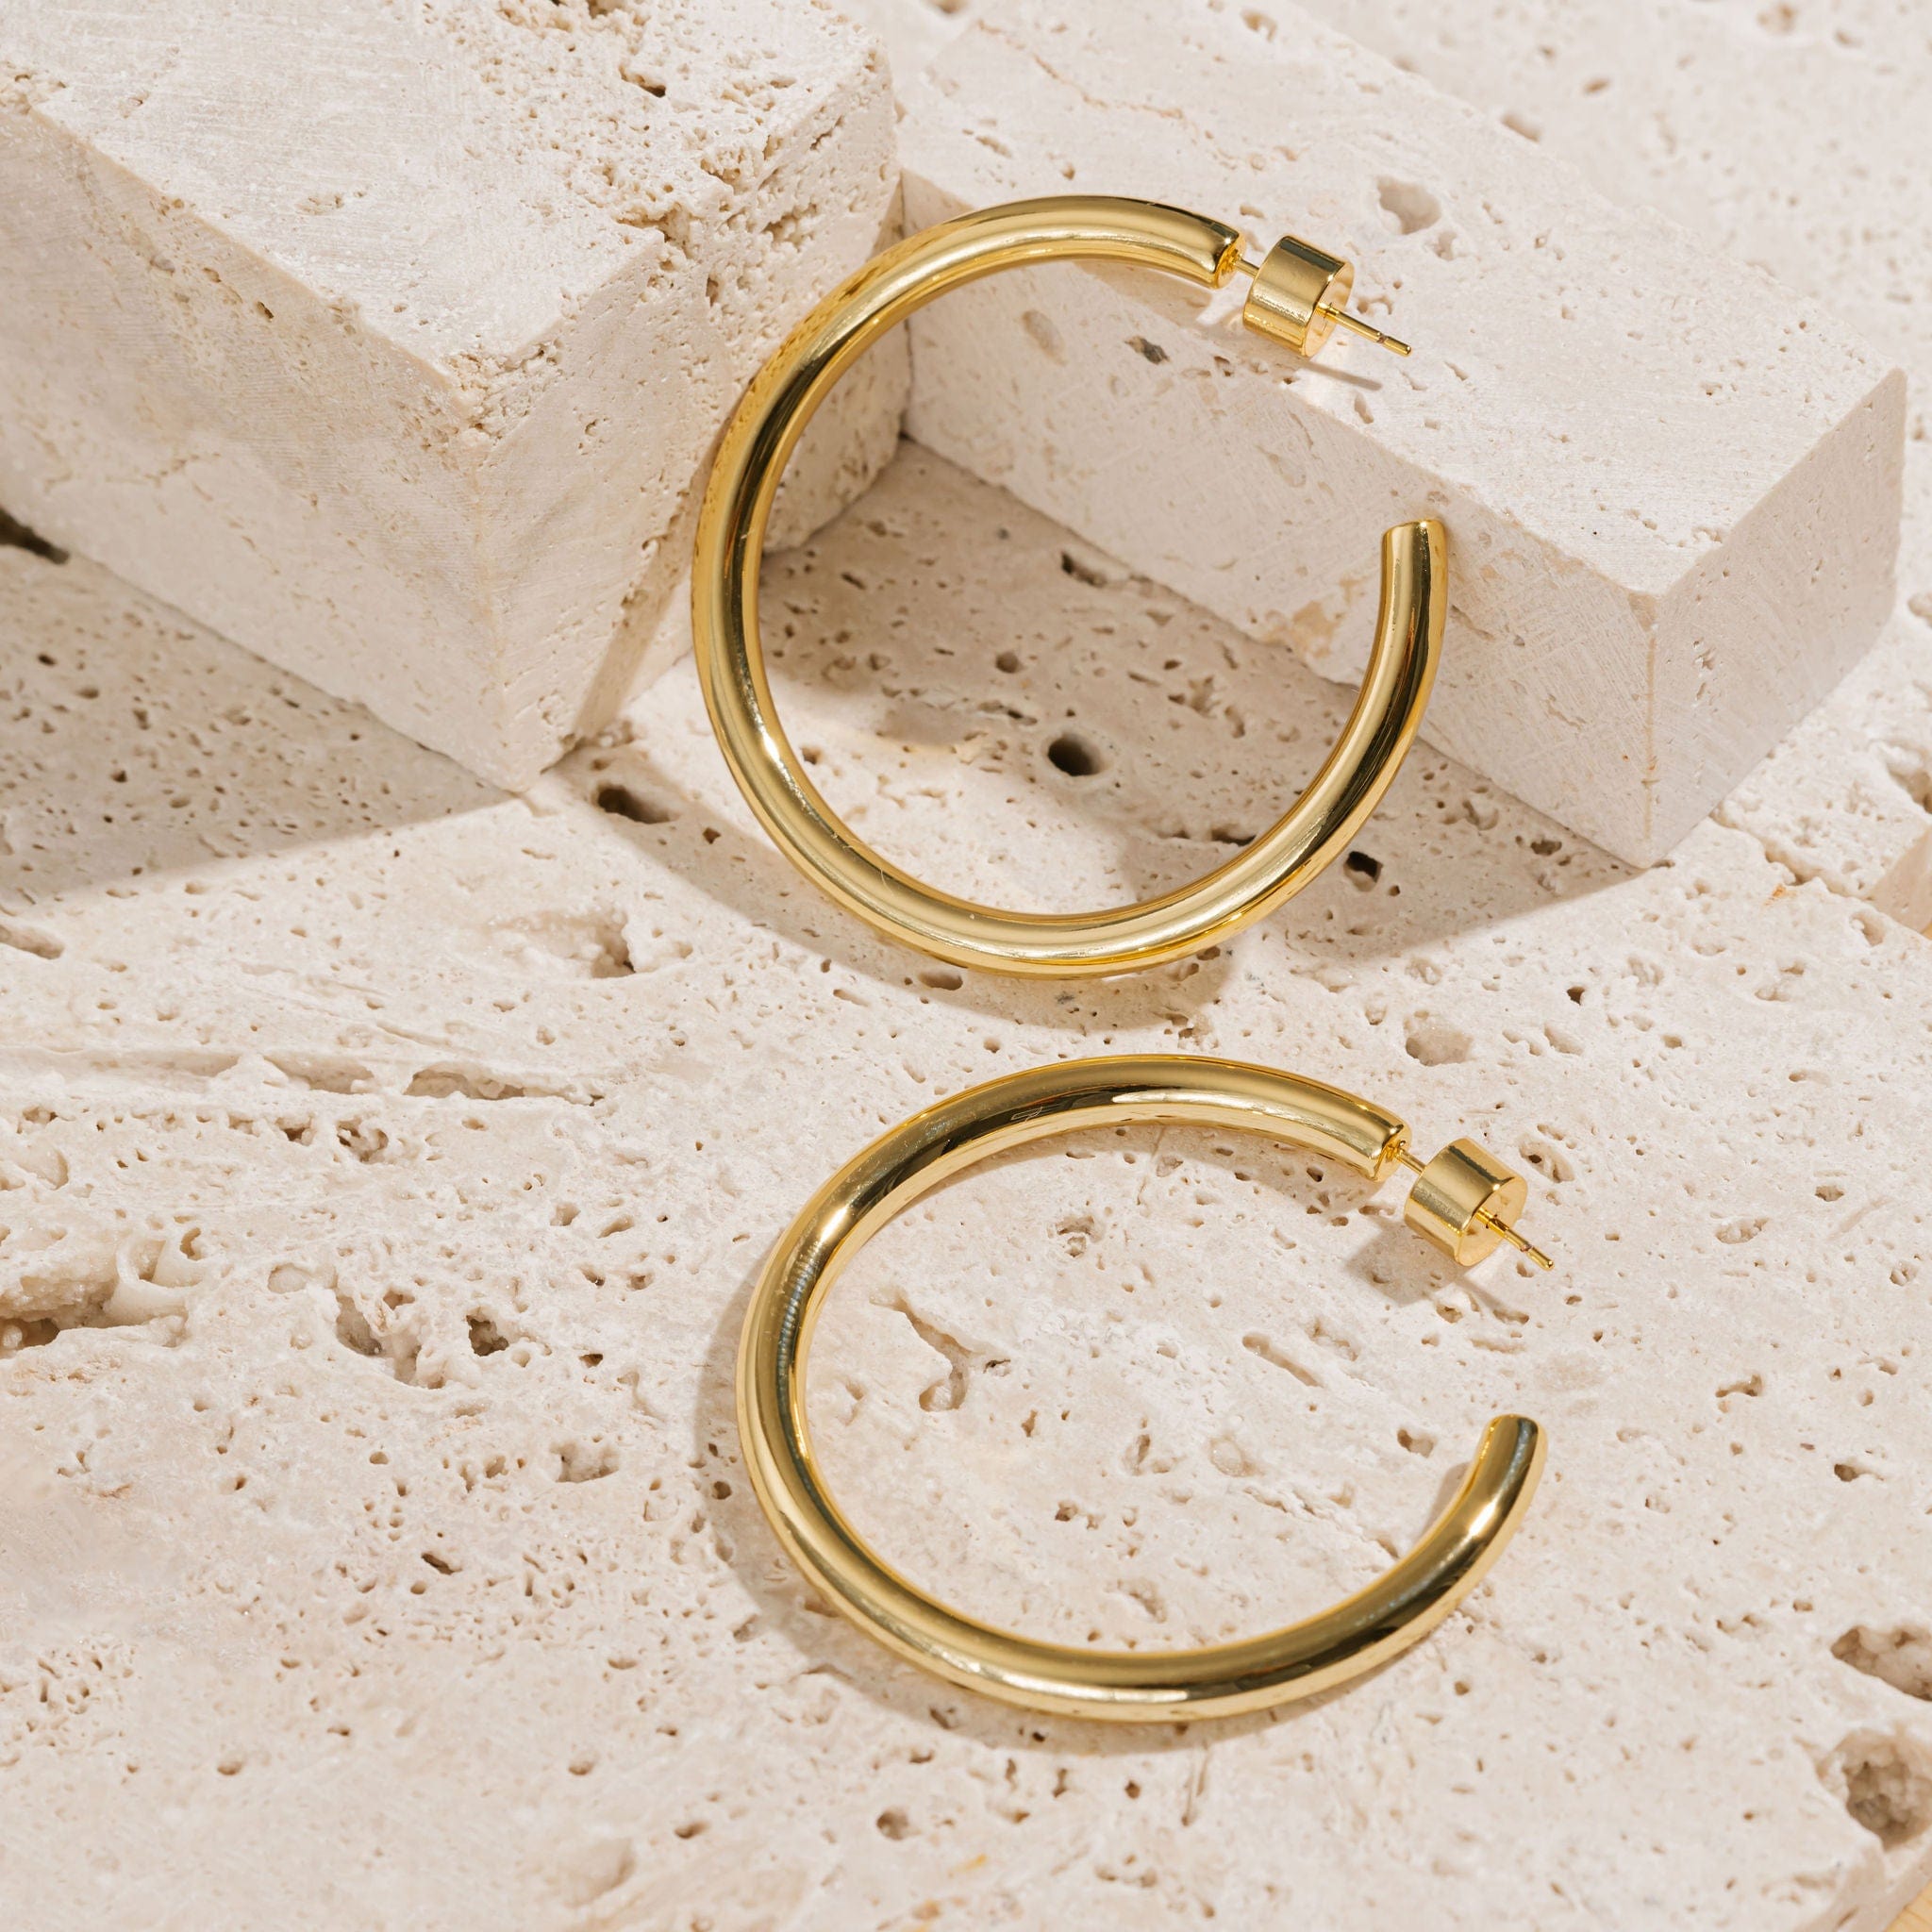 A pair of Malta Hoop 45mm earrings lays side by side on a porous stone slab, one earring laying flat on its side while the other is propped up against two raised blocks. 